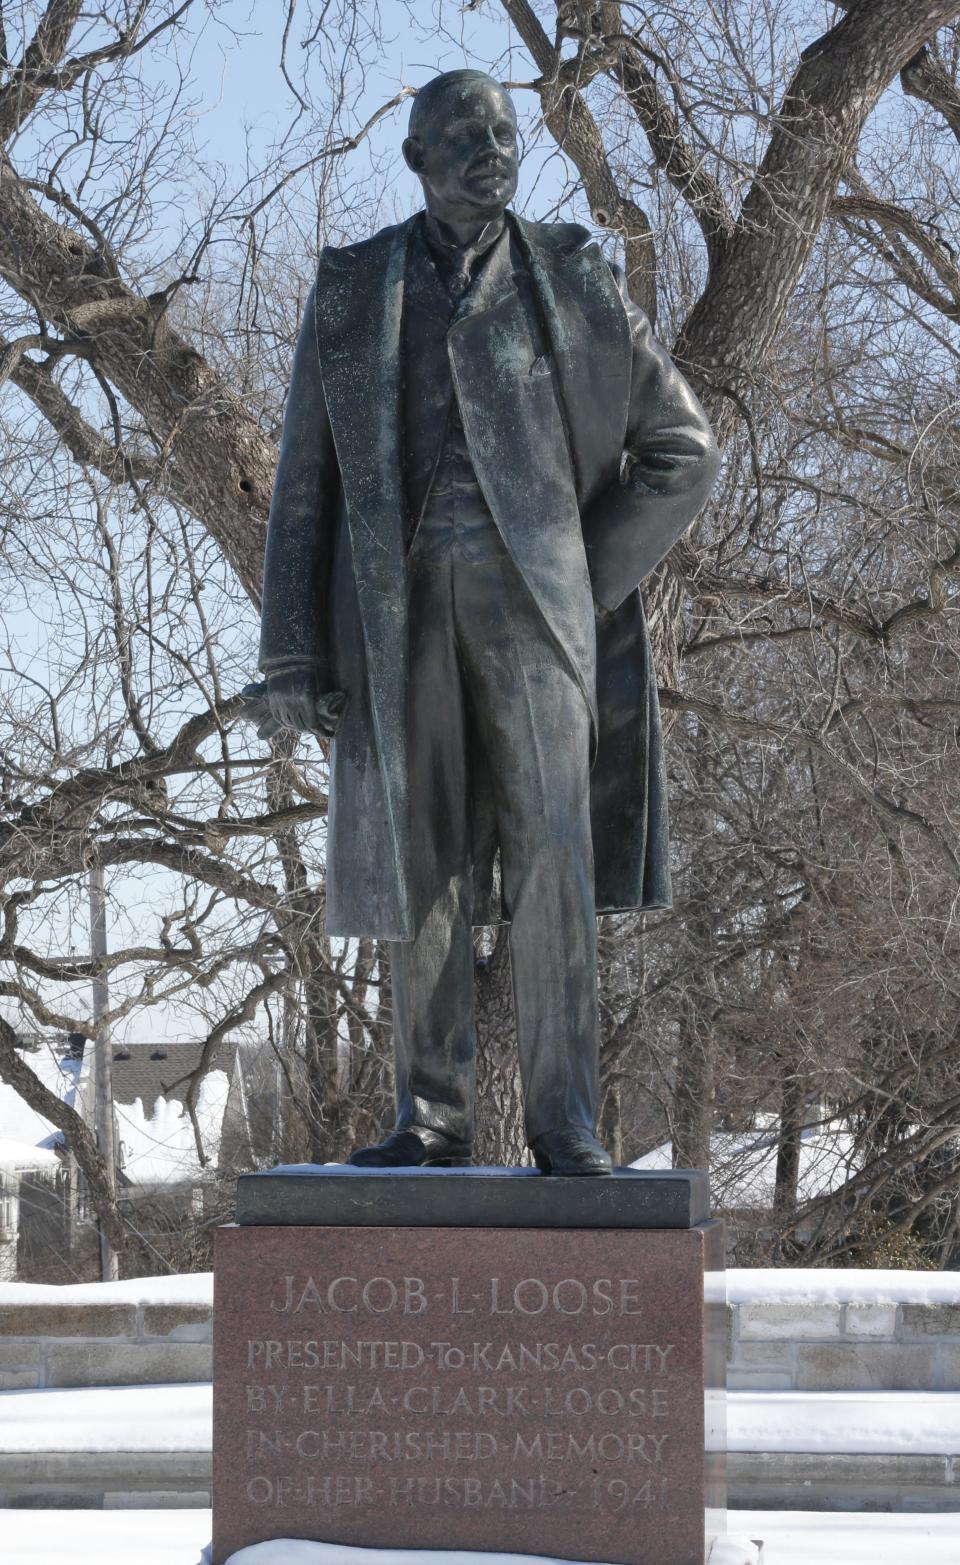 This Feb. 11, 2014 photo shows a statue of Jacob L. Loose looks over Loose Park in Kansas City, Mo. The 75-acre park has playgrounds, tennis courts, a 1.3 mile walking trail, ponds and a decades old rose garden, where weekend weddings have long been popular. The park also commemorates Kansas City’s Civil War heritage and was a major site for the Battle of Westport. (AP Photo/Orlin Wagner)